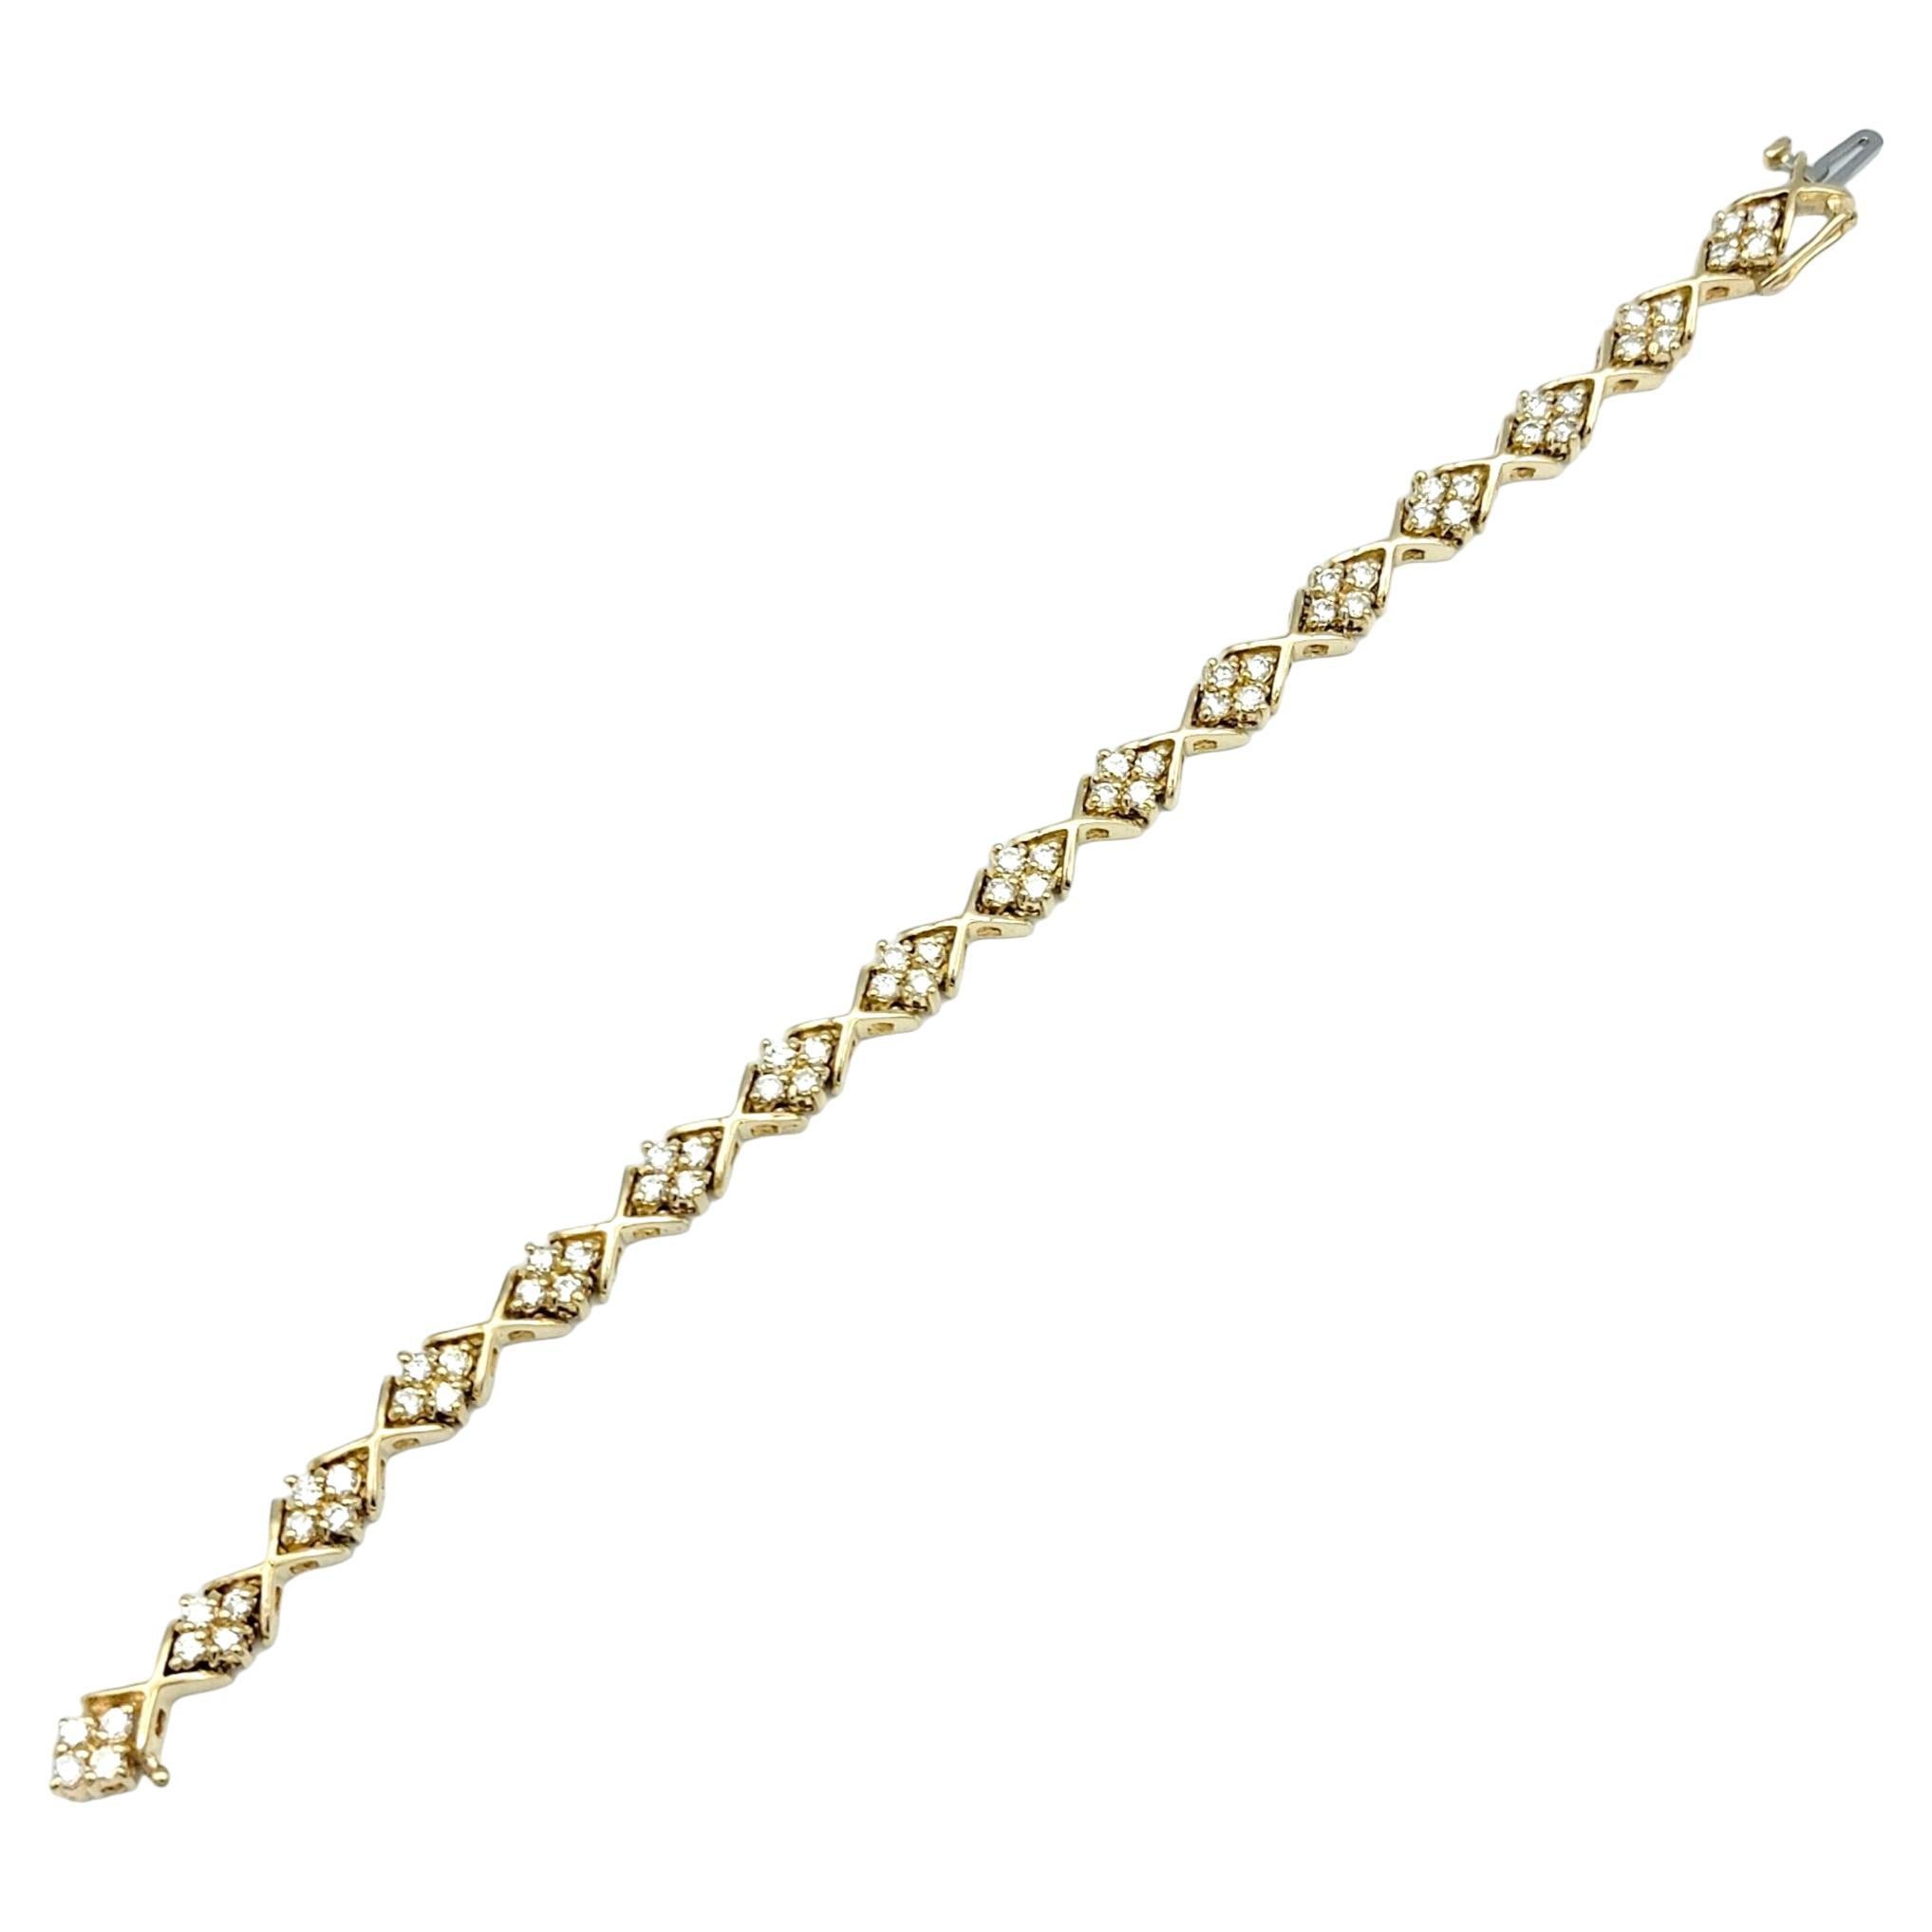 This gorgeous diamond link bracelet, elegantly set in radiant 14 karat yellow gold, exudes timeless charm and sophistication. Each link of the bracelet is meticulously crafted to alternate between two distinct motifs: a rhombus shape formation